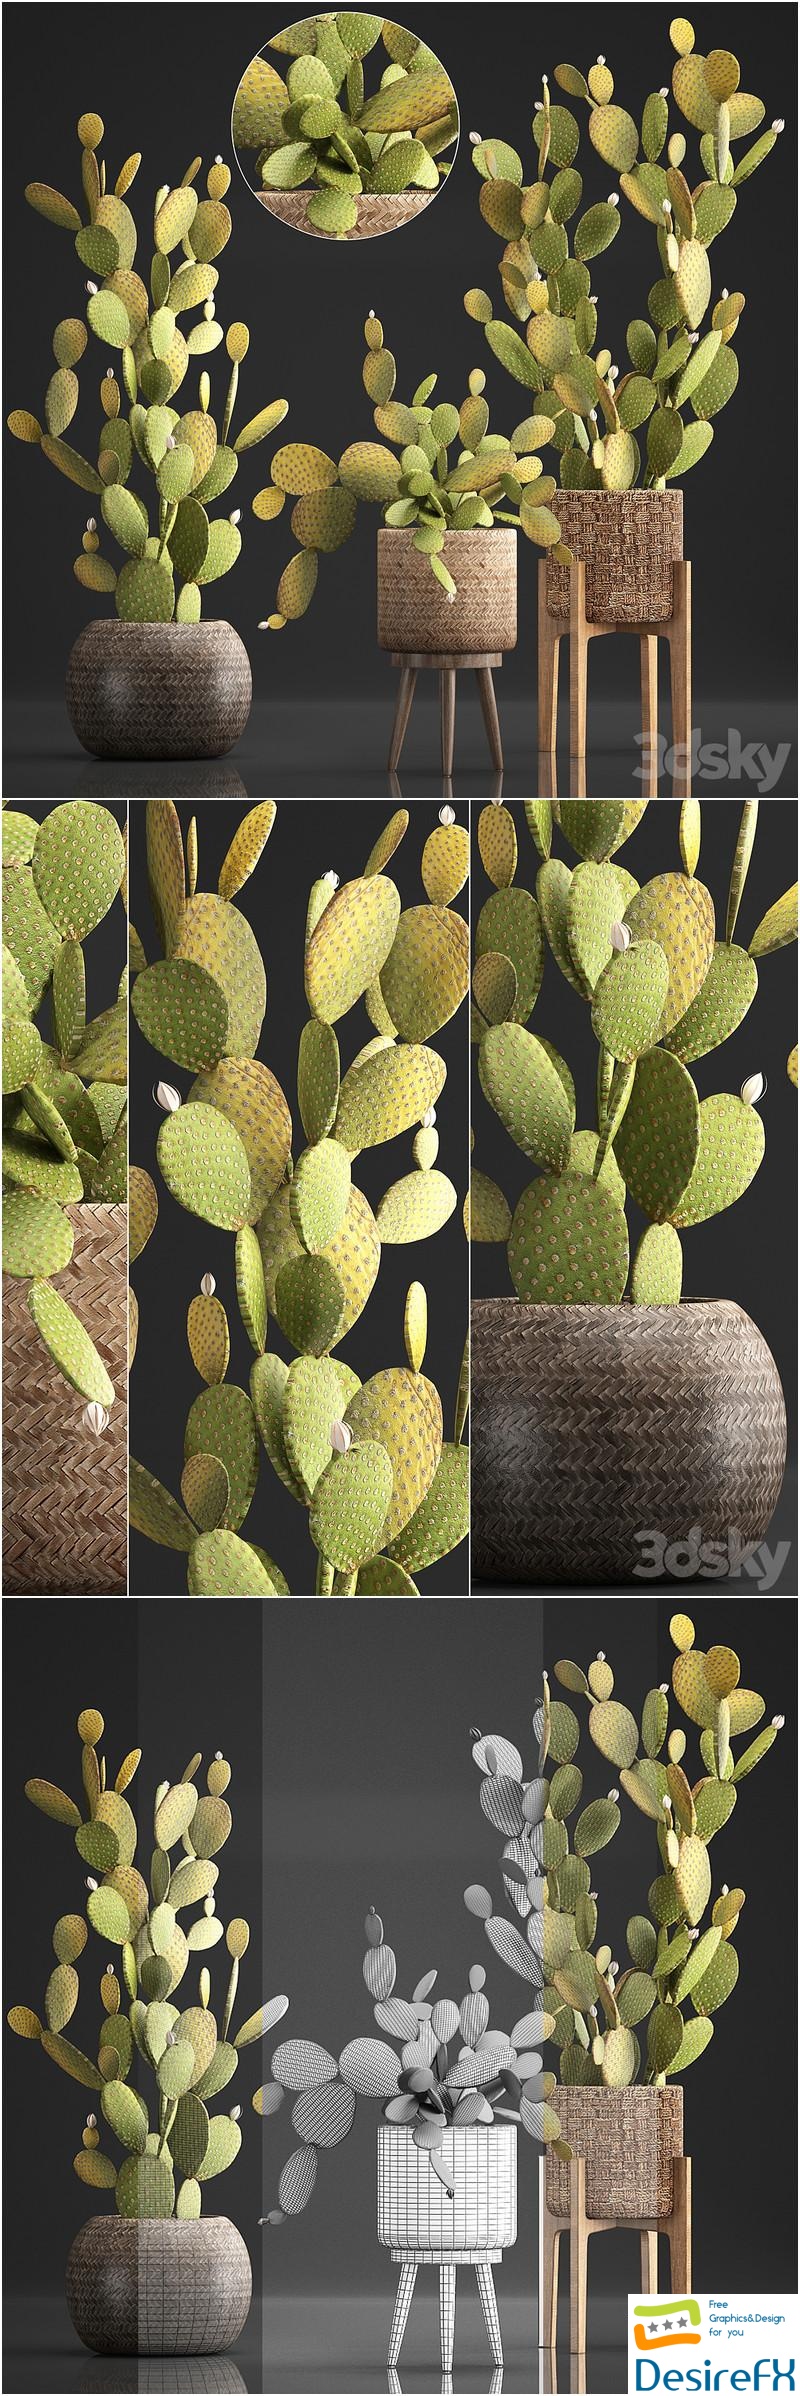 Plant Collection 375. Cactus set. cacti, basket, rattan, prickly pear, indoor cactus, Prickly pear, eco style, design, natural materials 3D Model